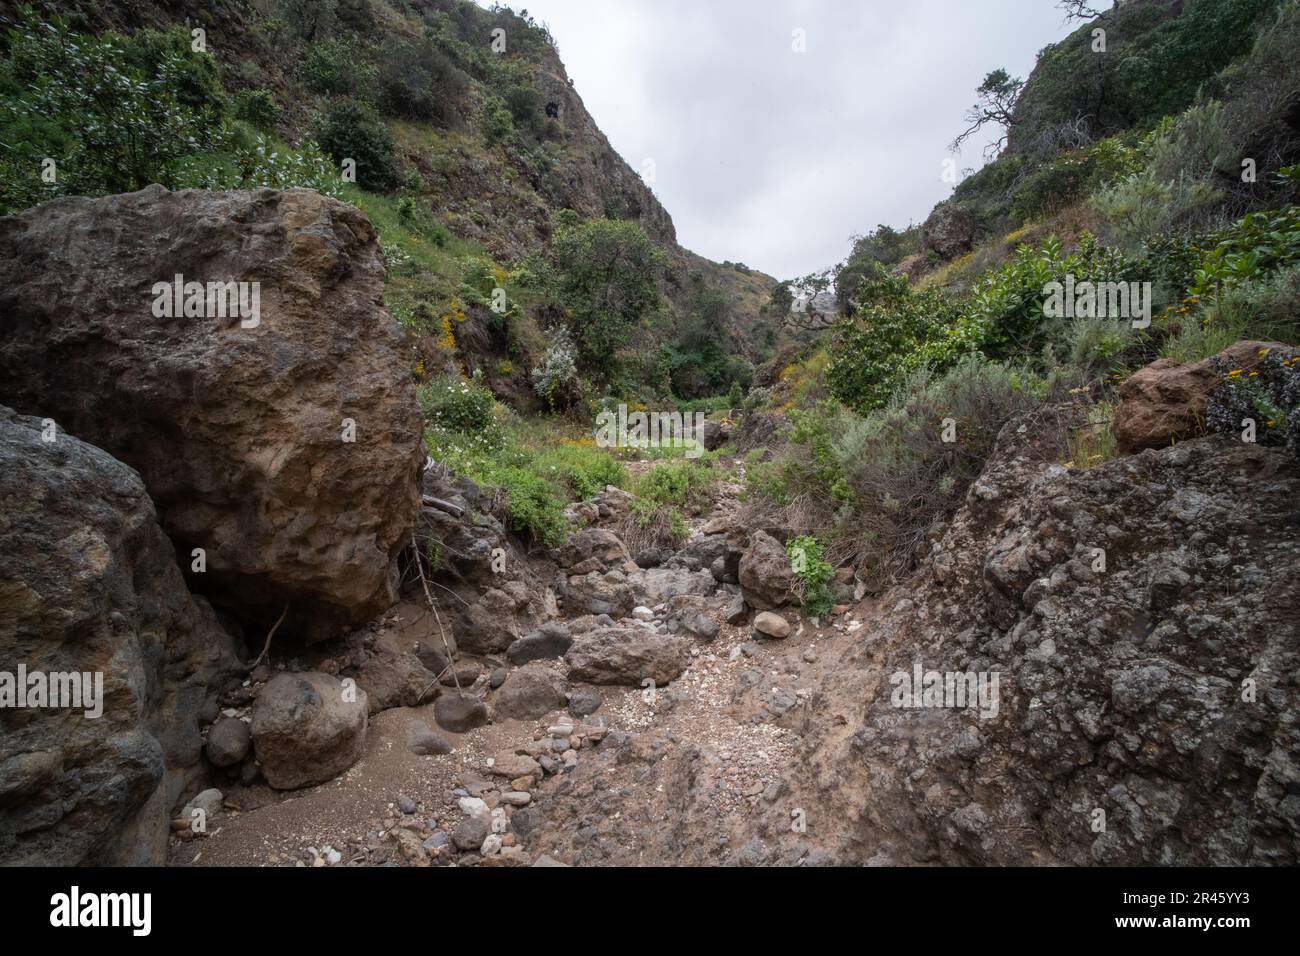 Smugglers Canyon on Santa Cruz island in the Channel islands National Park, Southern California. Stock Photo